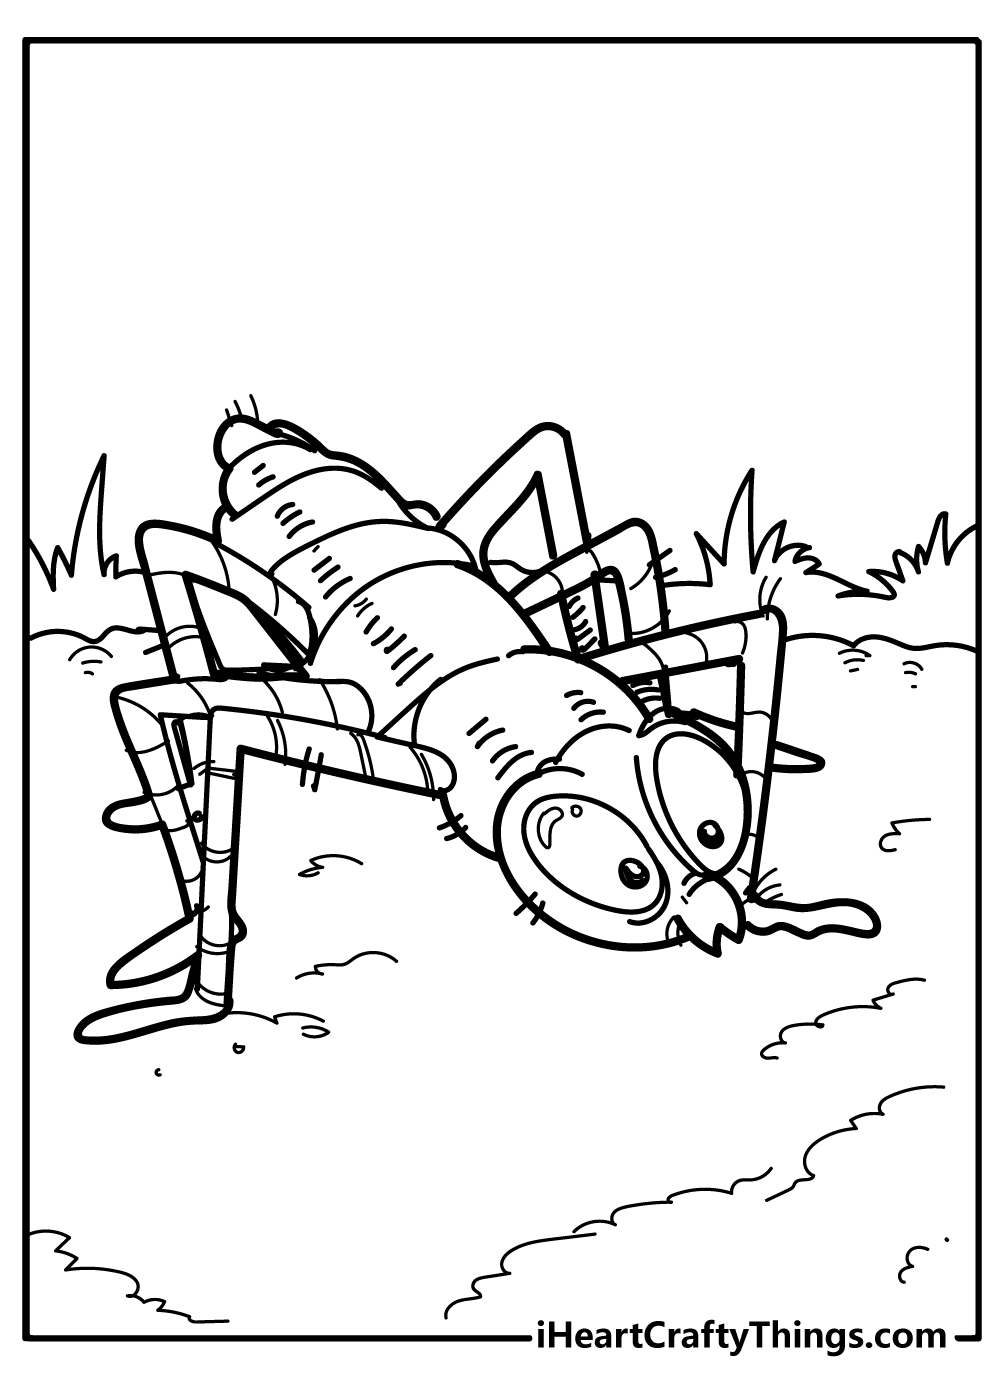 Bug Coloring Pages free pdf download